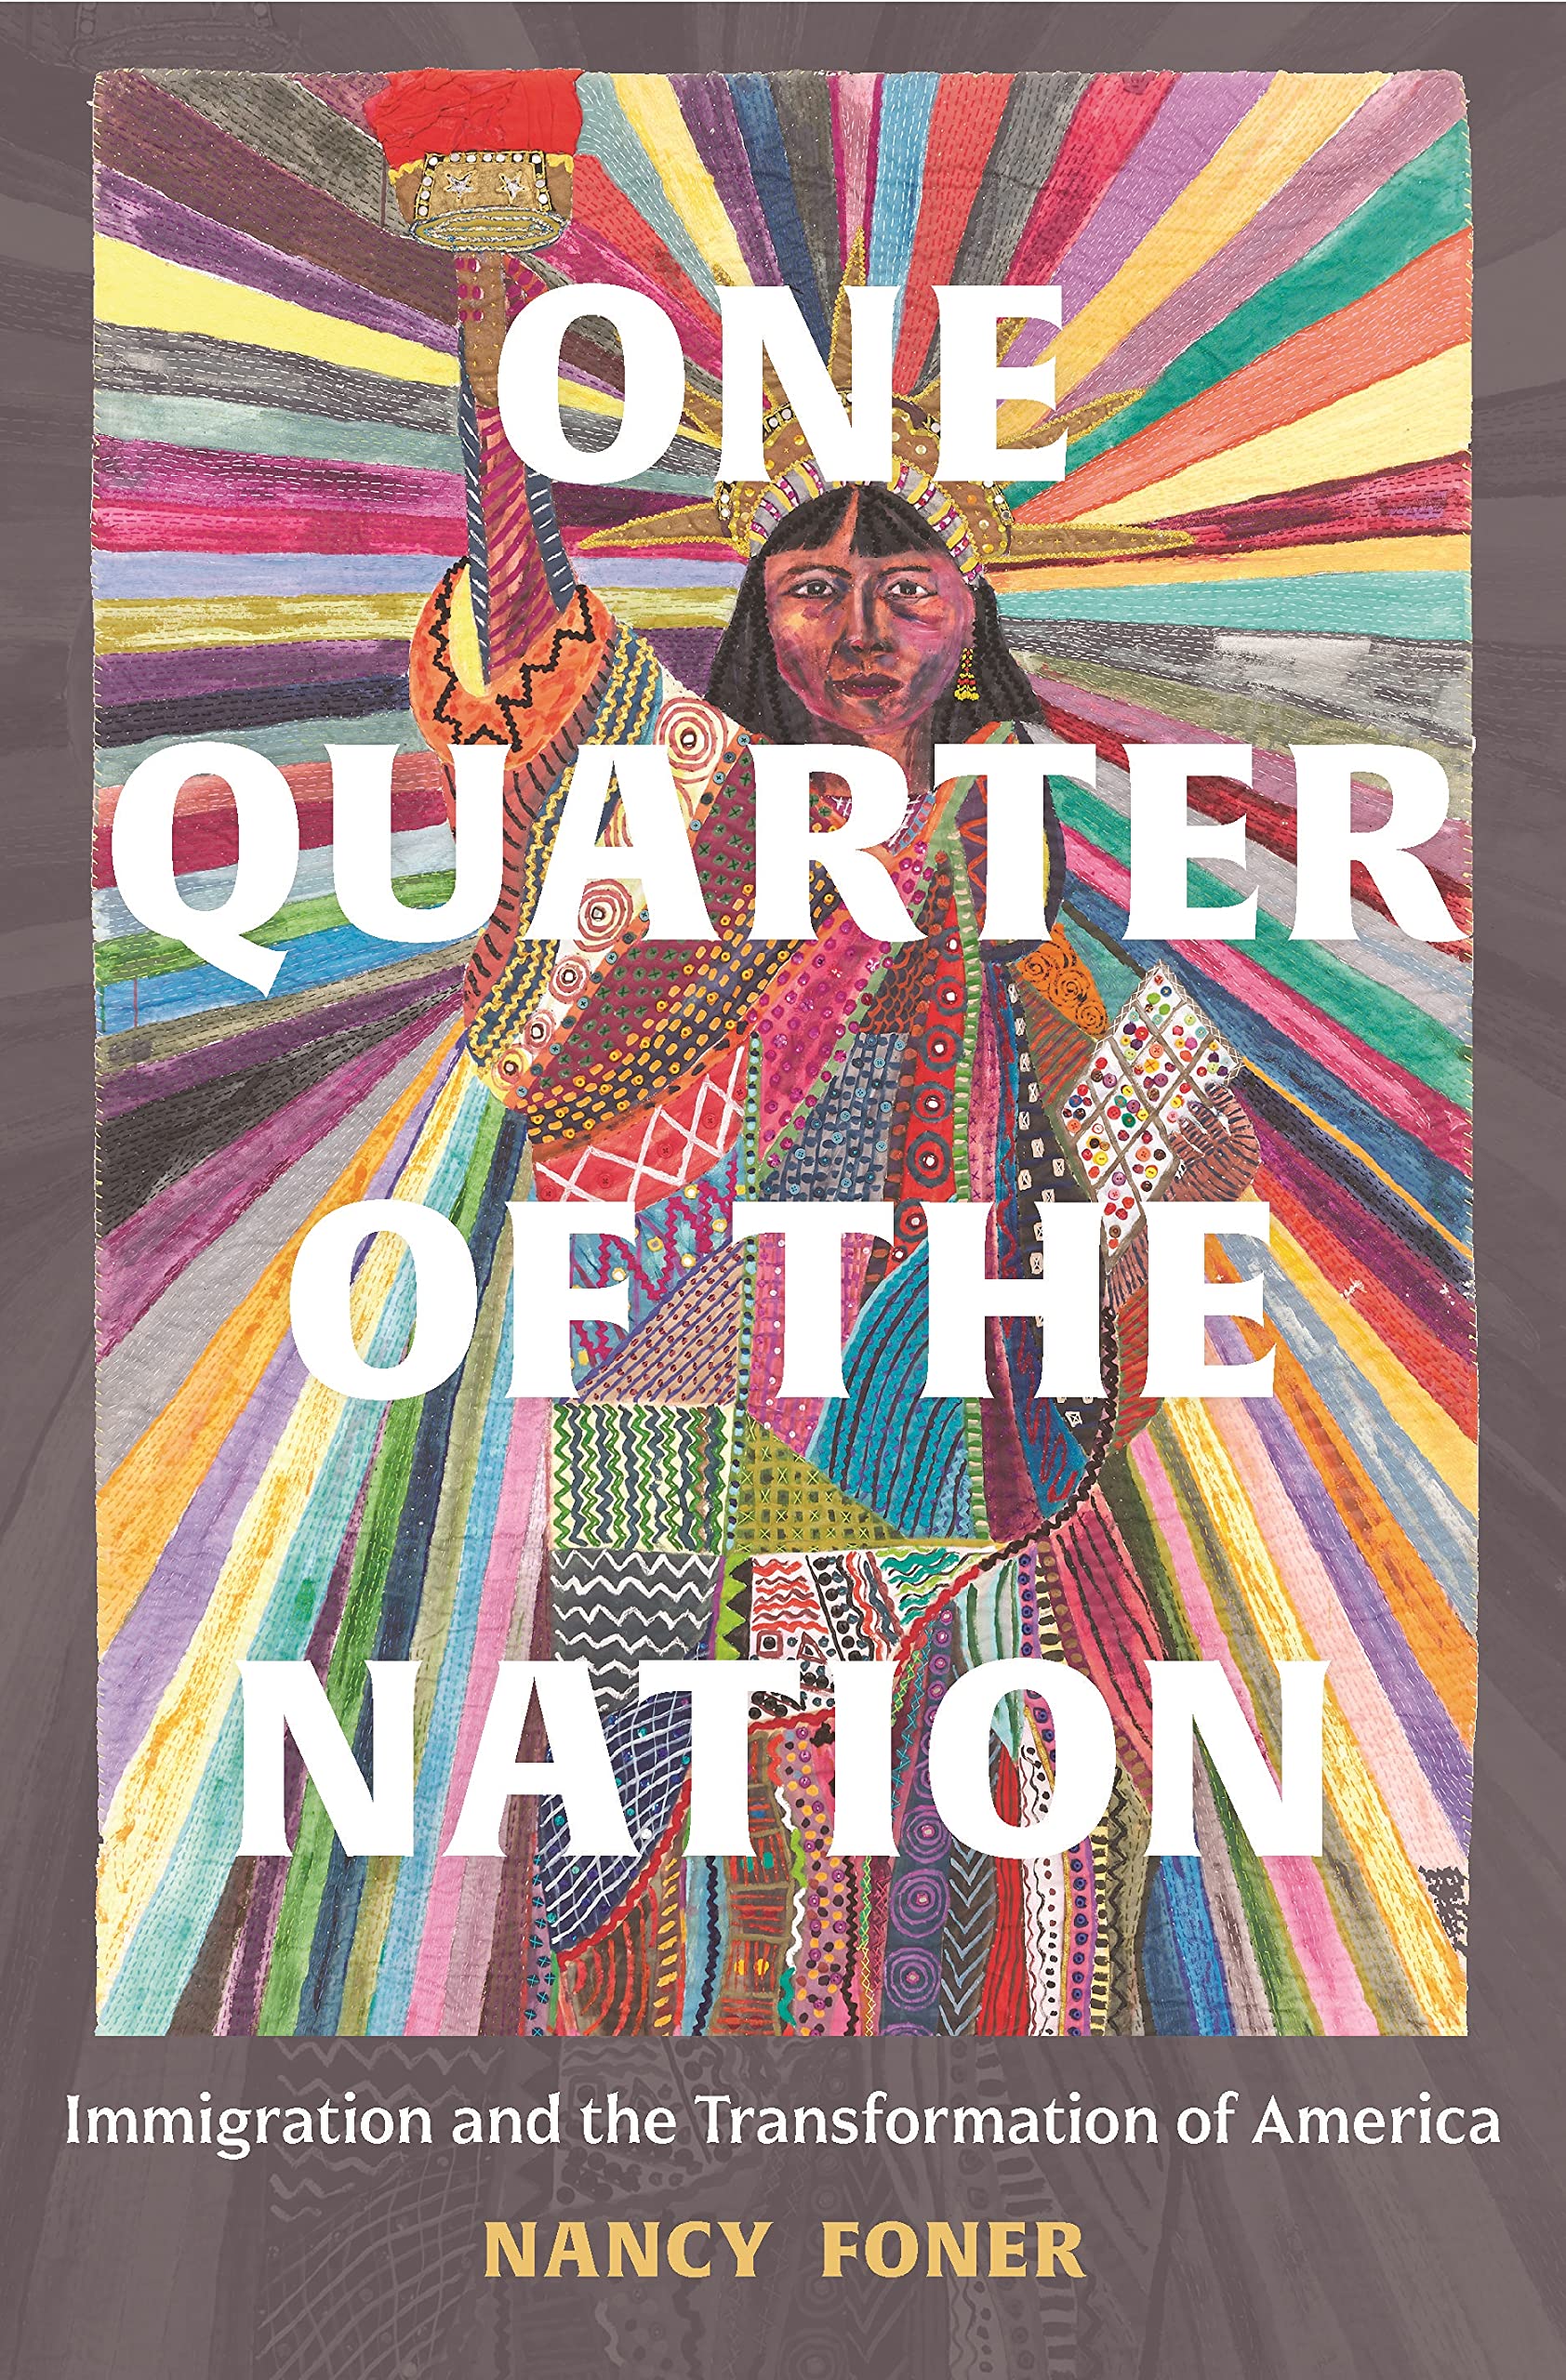 Image for "One Quarter of the Nation"